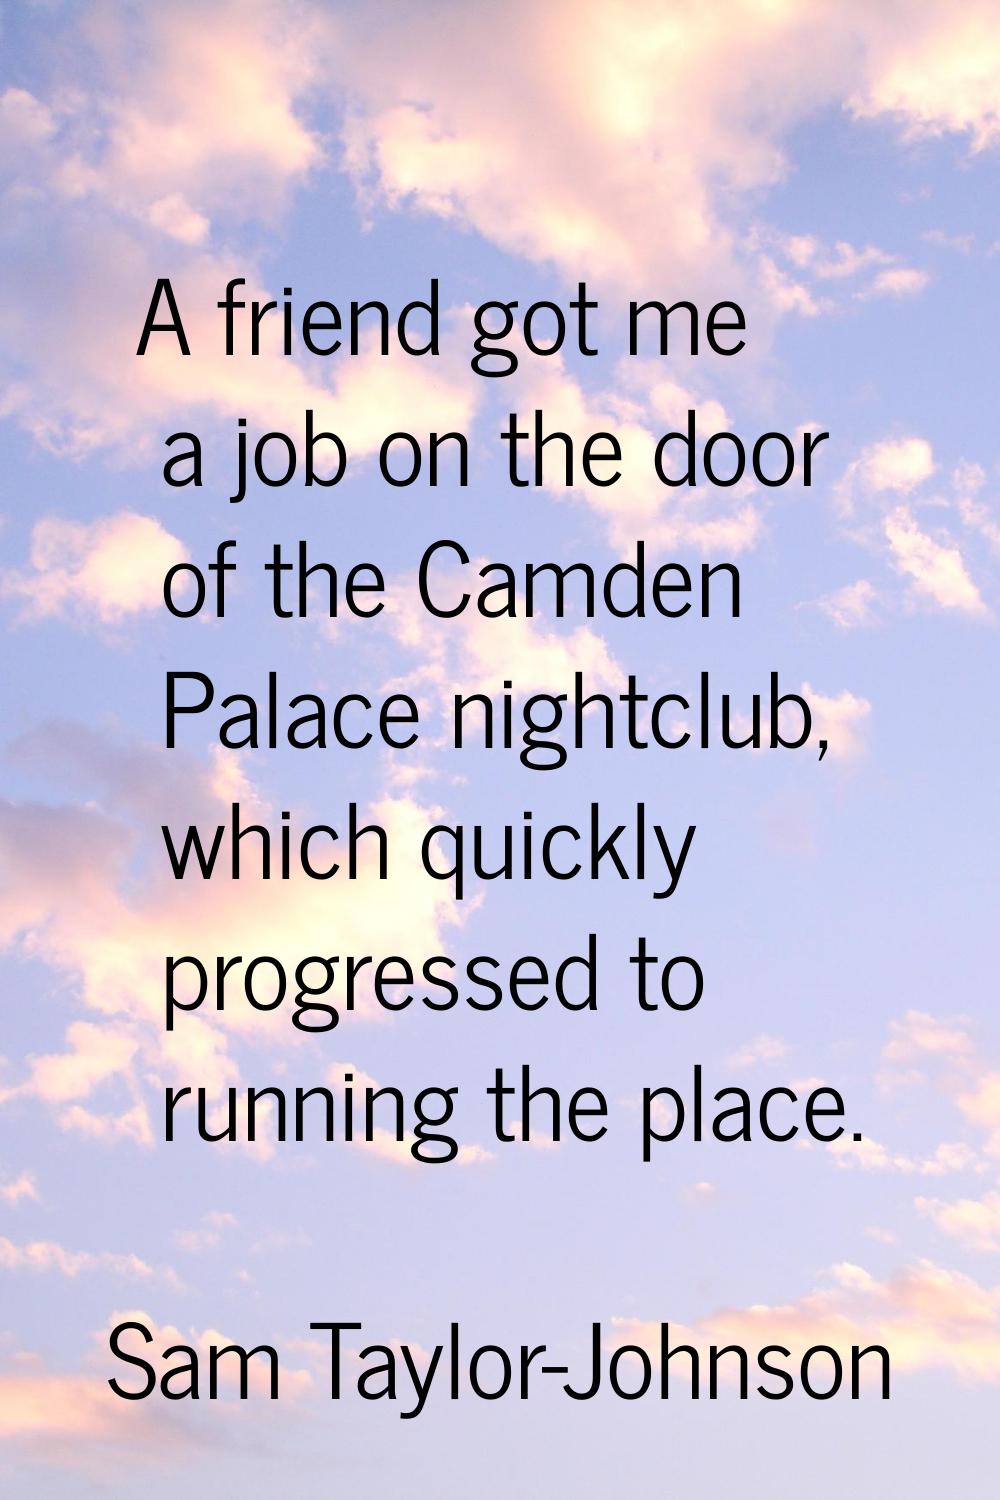 A friend got me a job on the door of the Camden Palace nightclub, which quickly progressed to runni